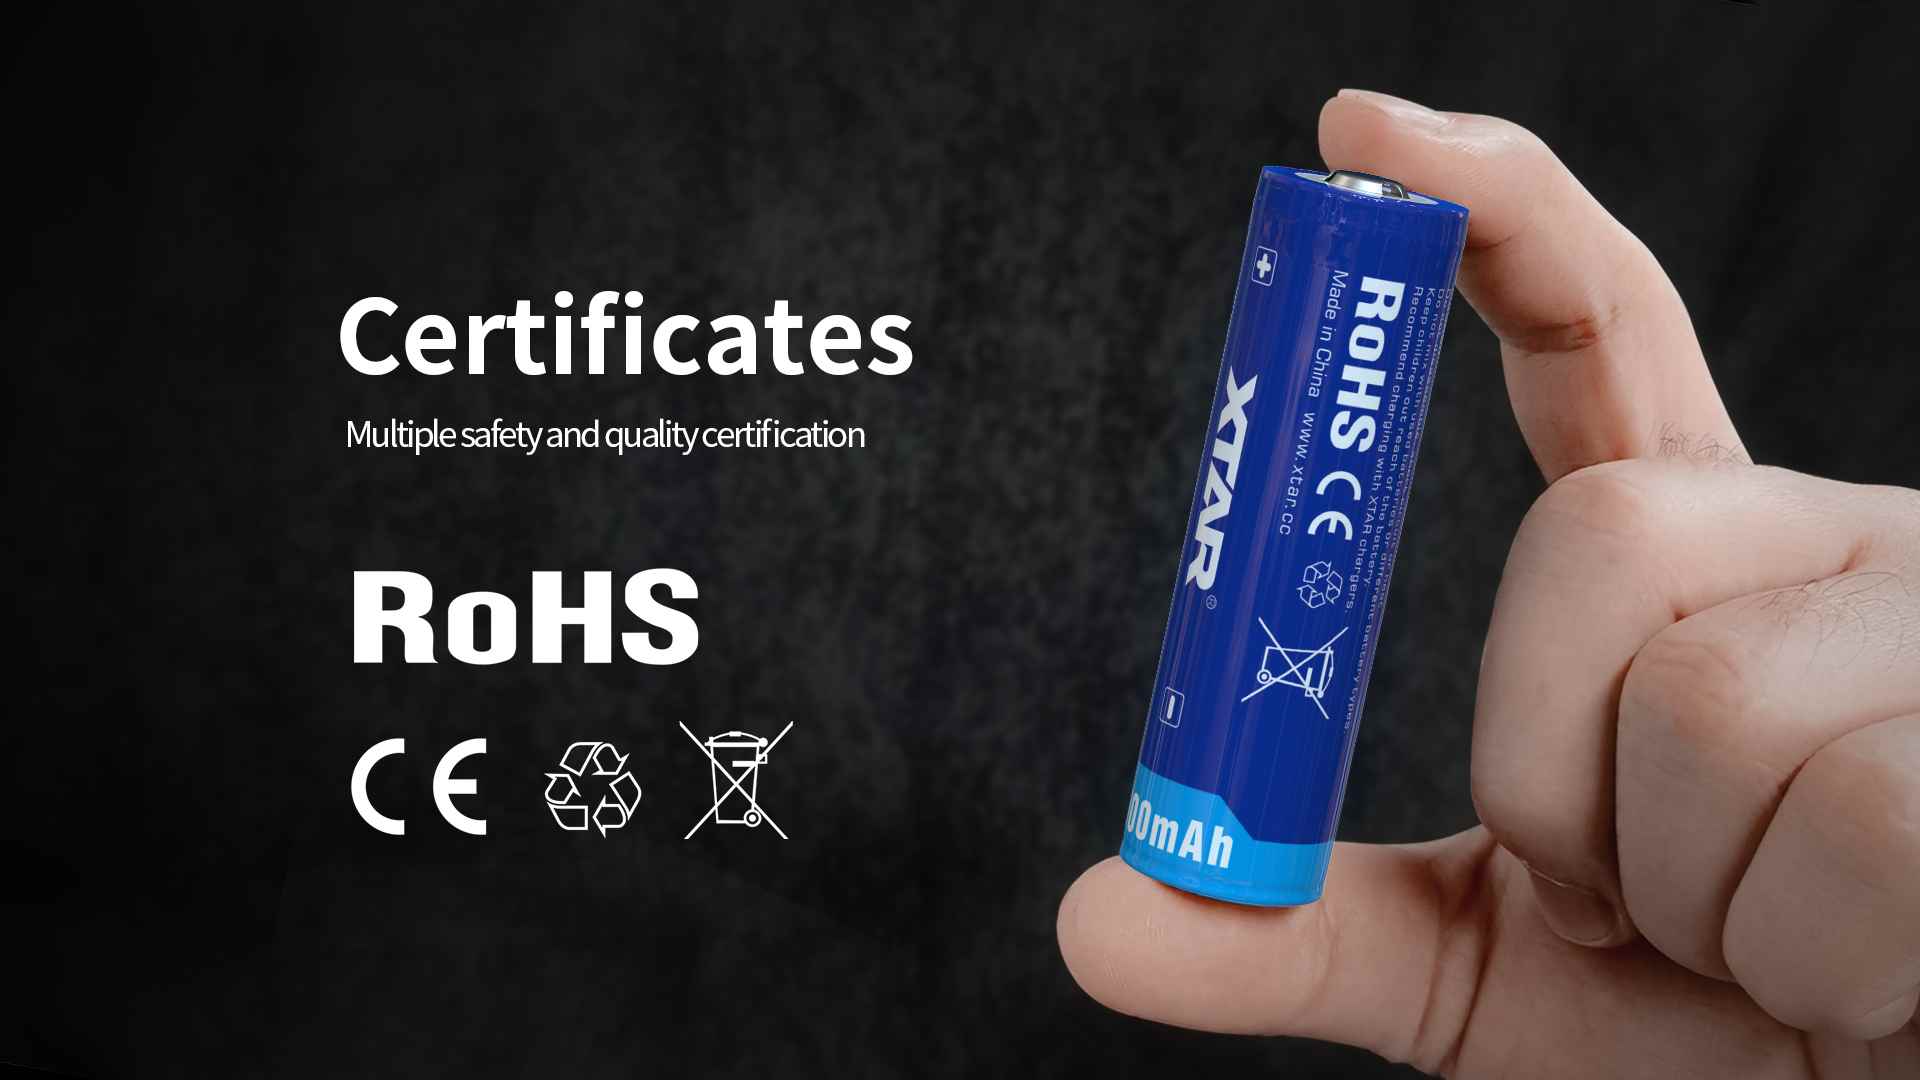 XTAR 21700 batteries gain multiple safety and quality certifications.